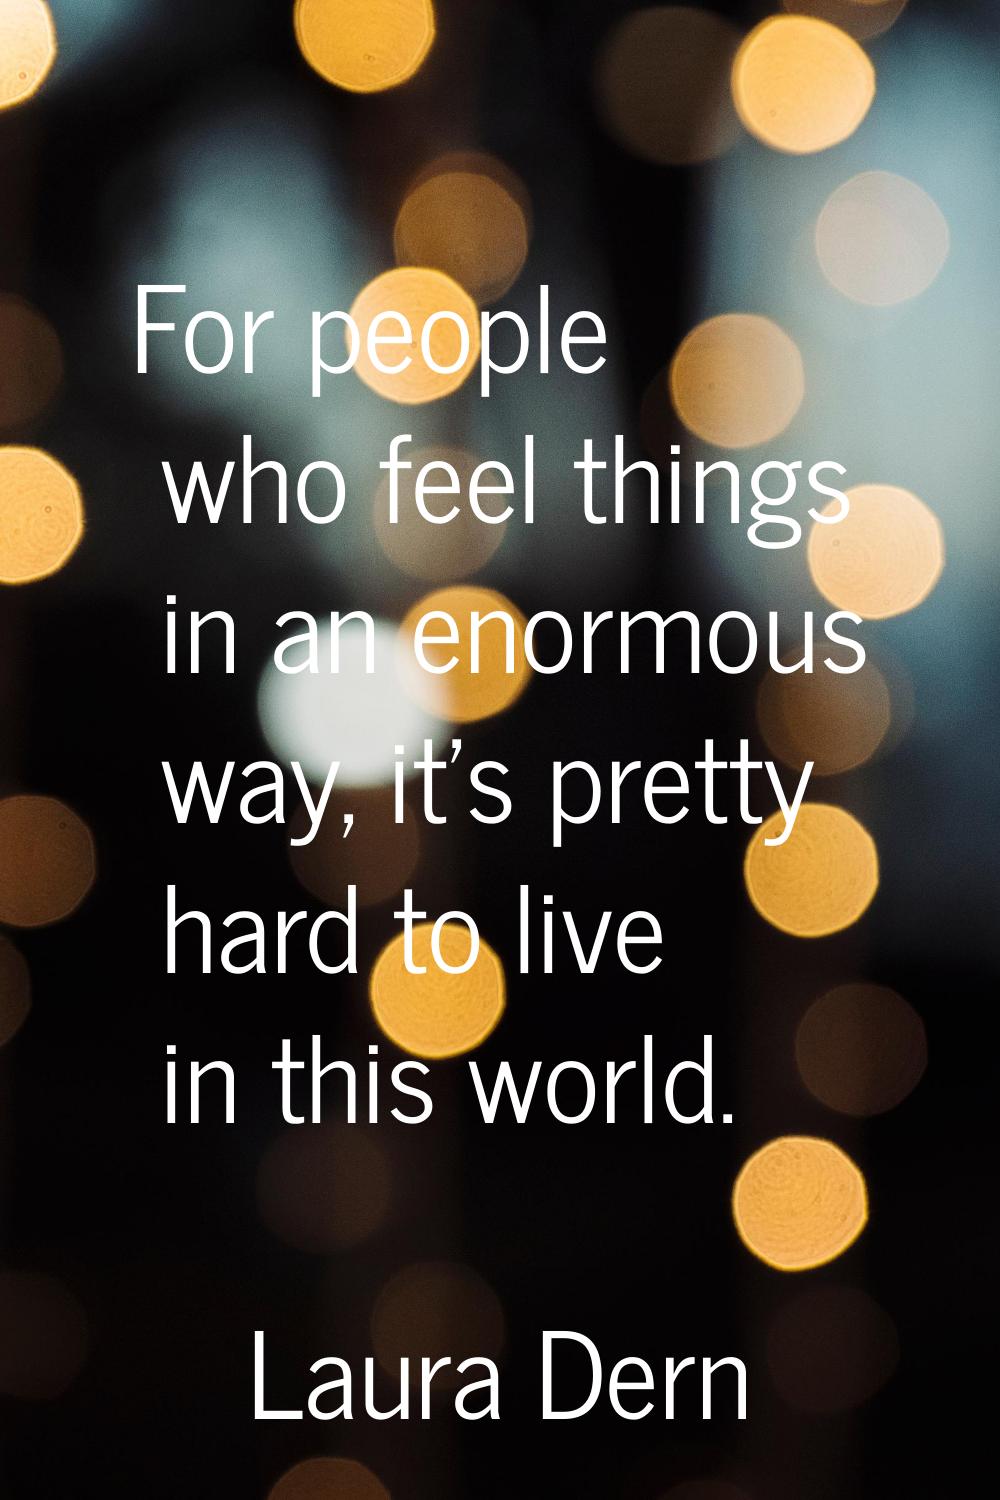 For people who feel things in an enormous way, it's pretty hard to live in this world.